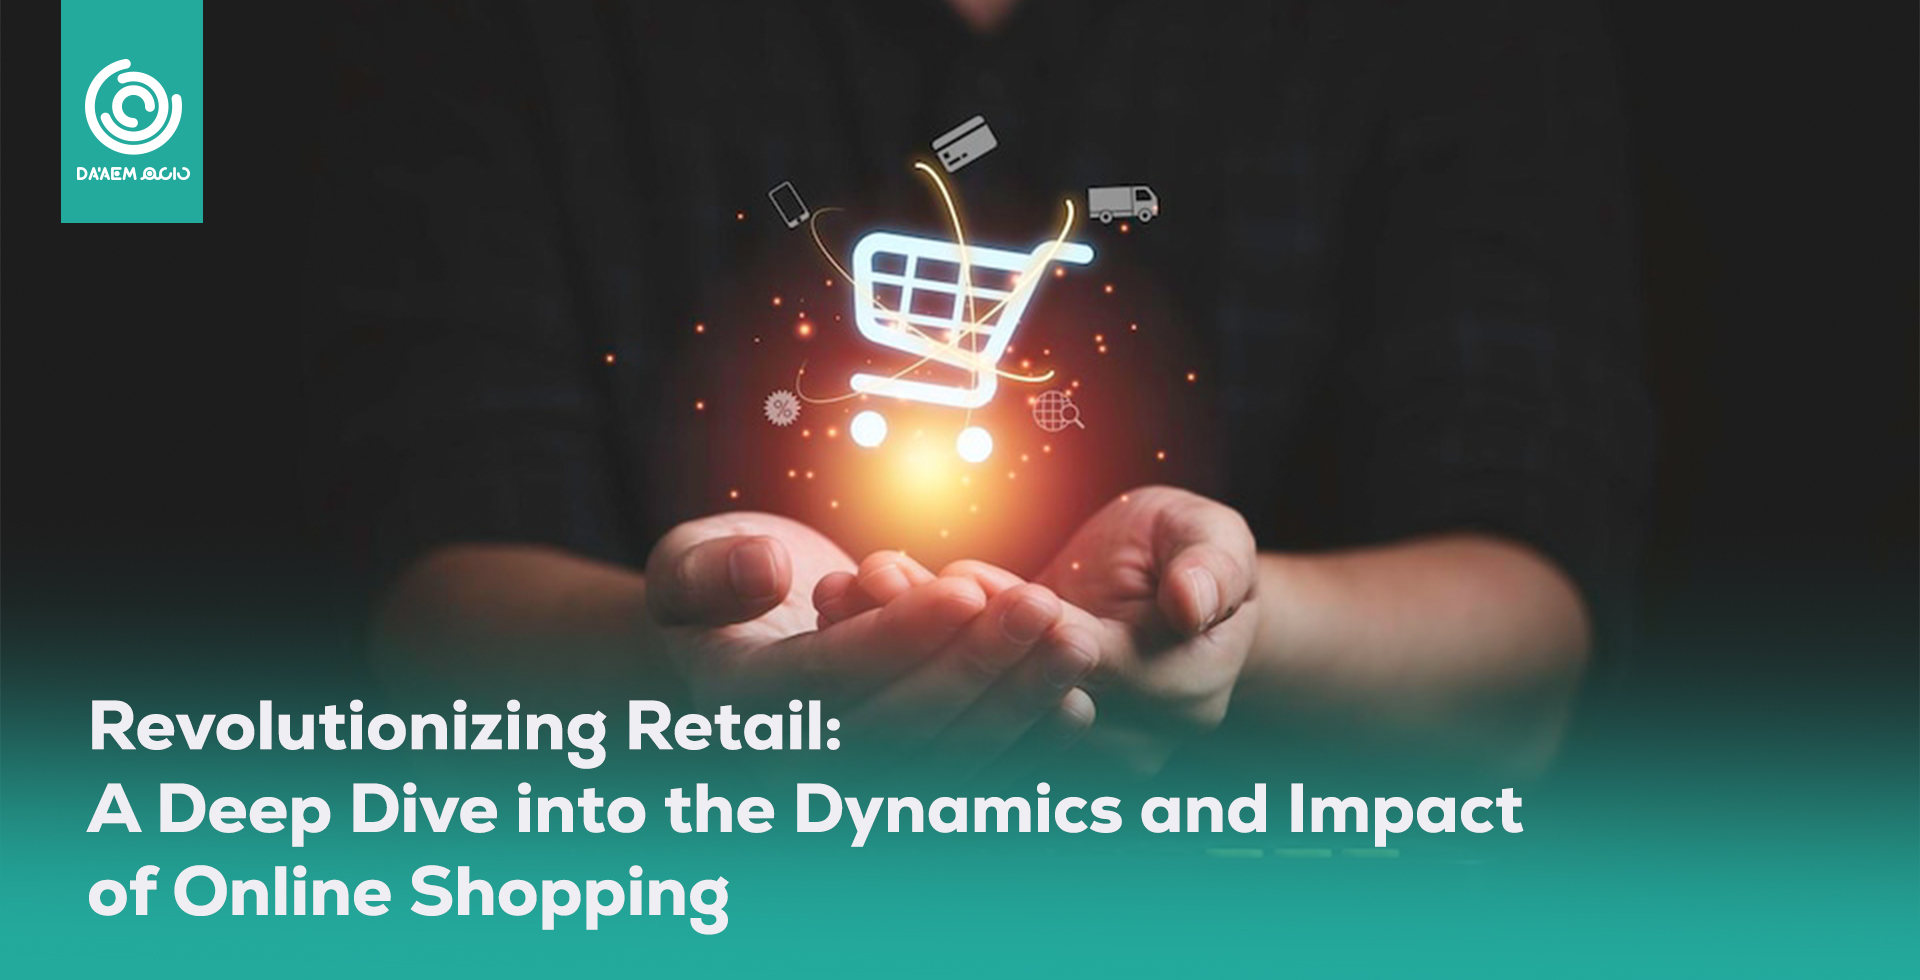 Revolutionizing Retail: A Deep Dive into the Dynamics and Impact of Online Shopping